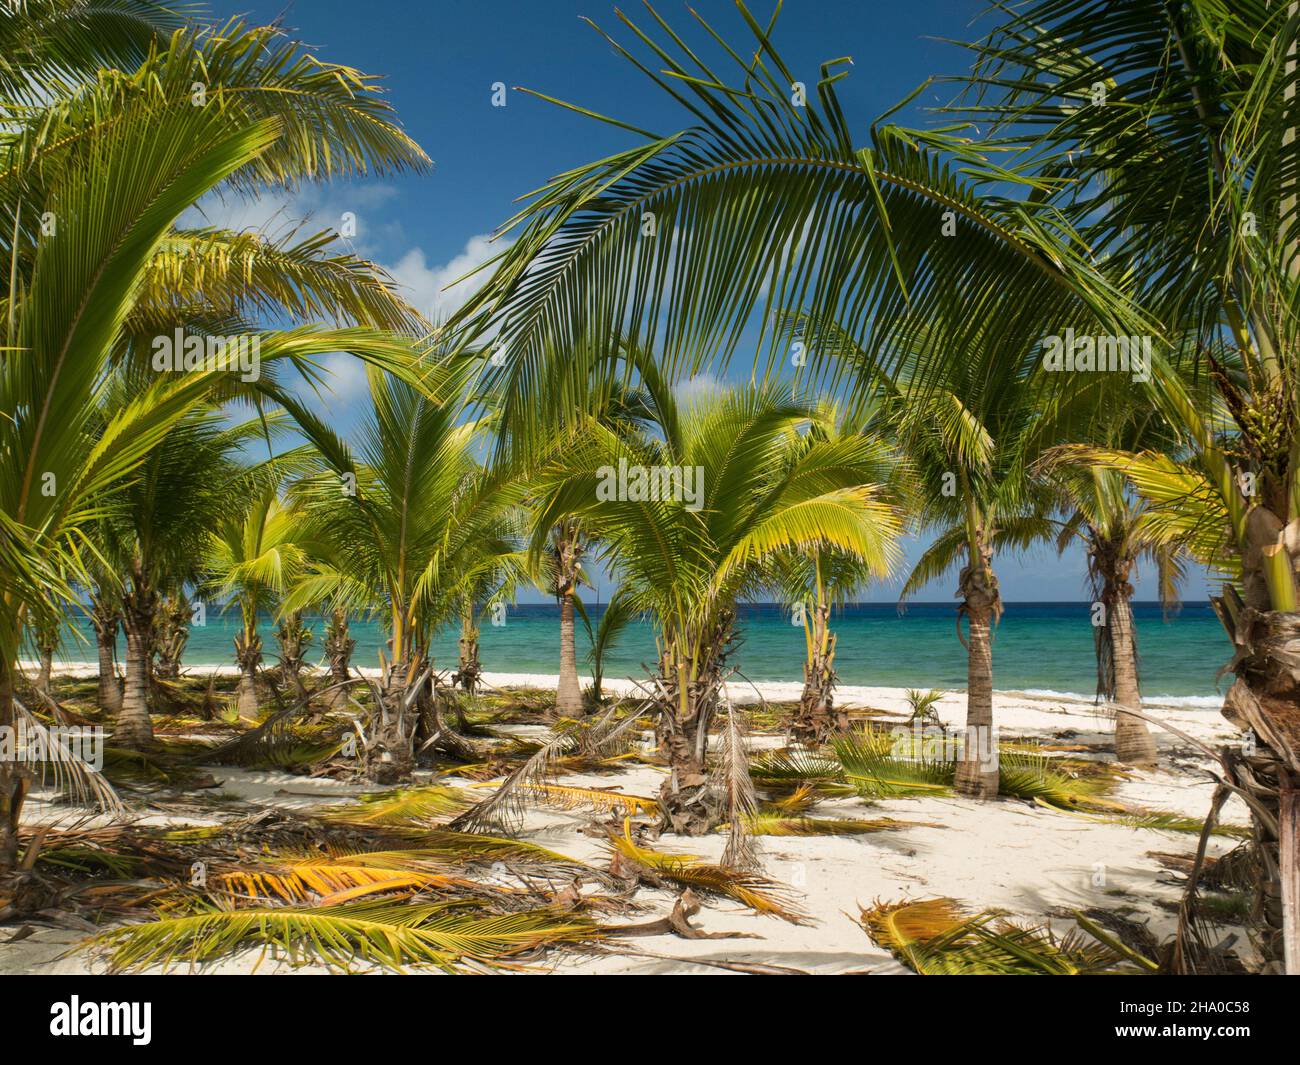 Palms on beach in Mexico Stock Photo